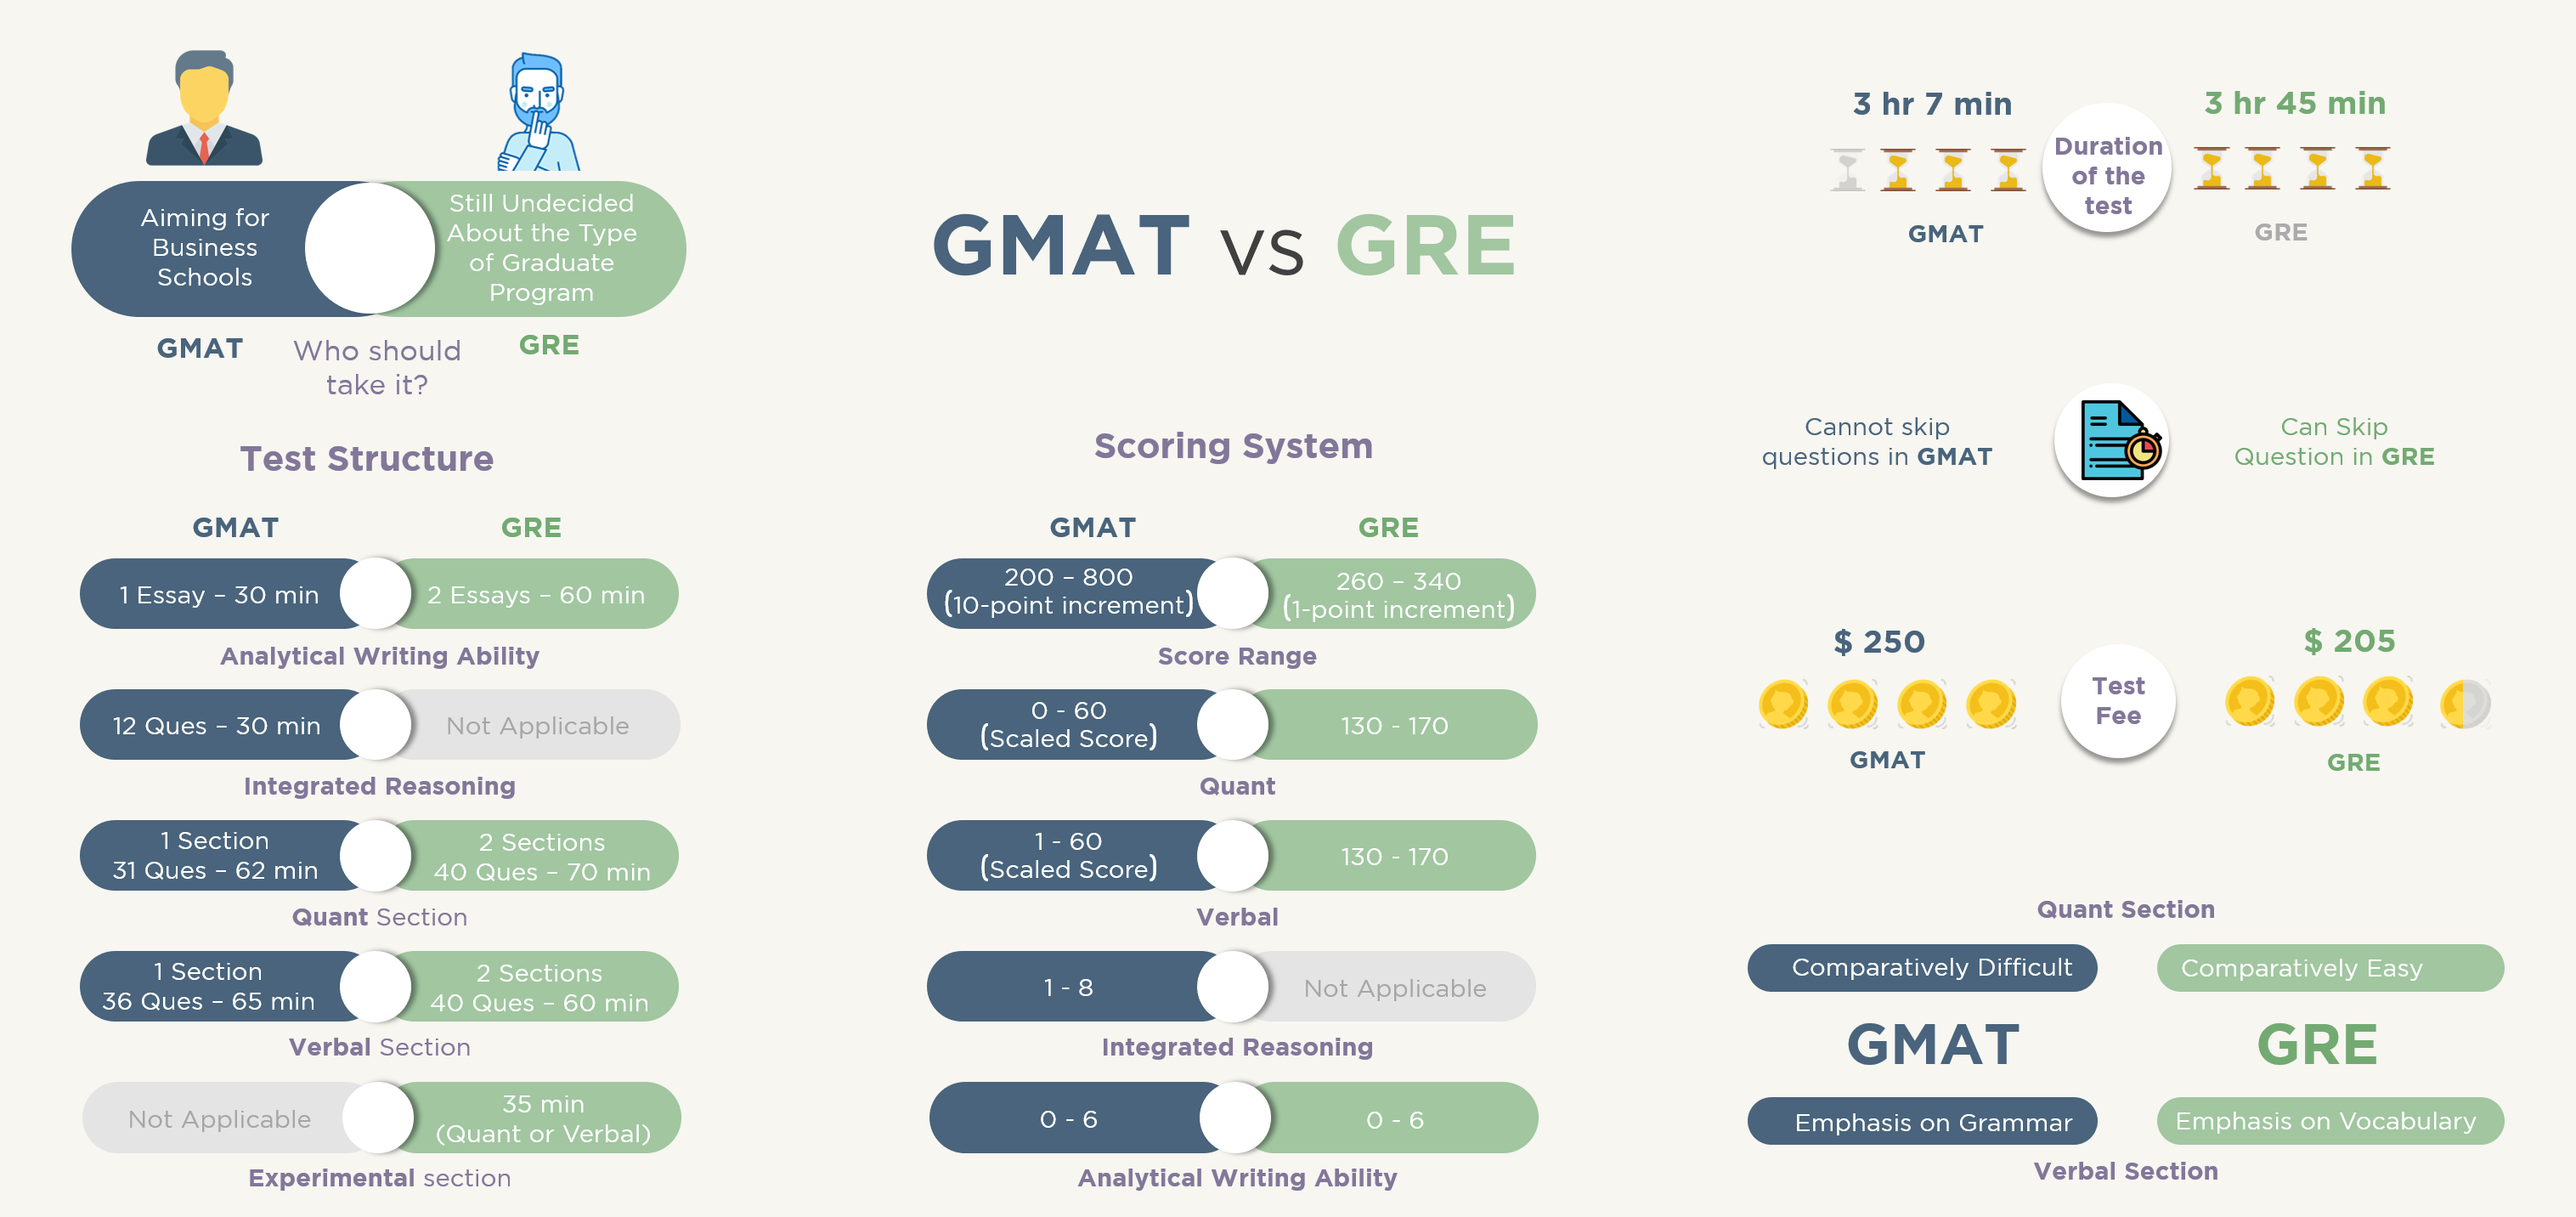 GMAT vs GRE 2023 – Which should I take?